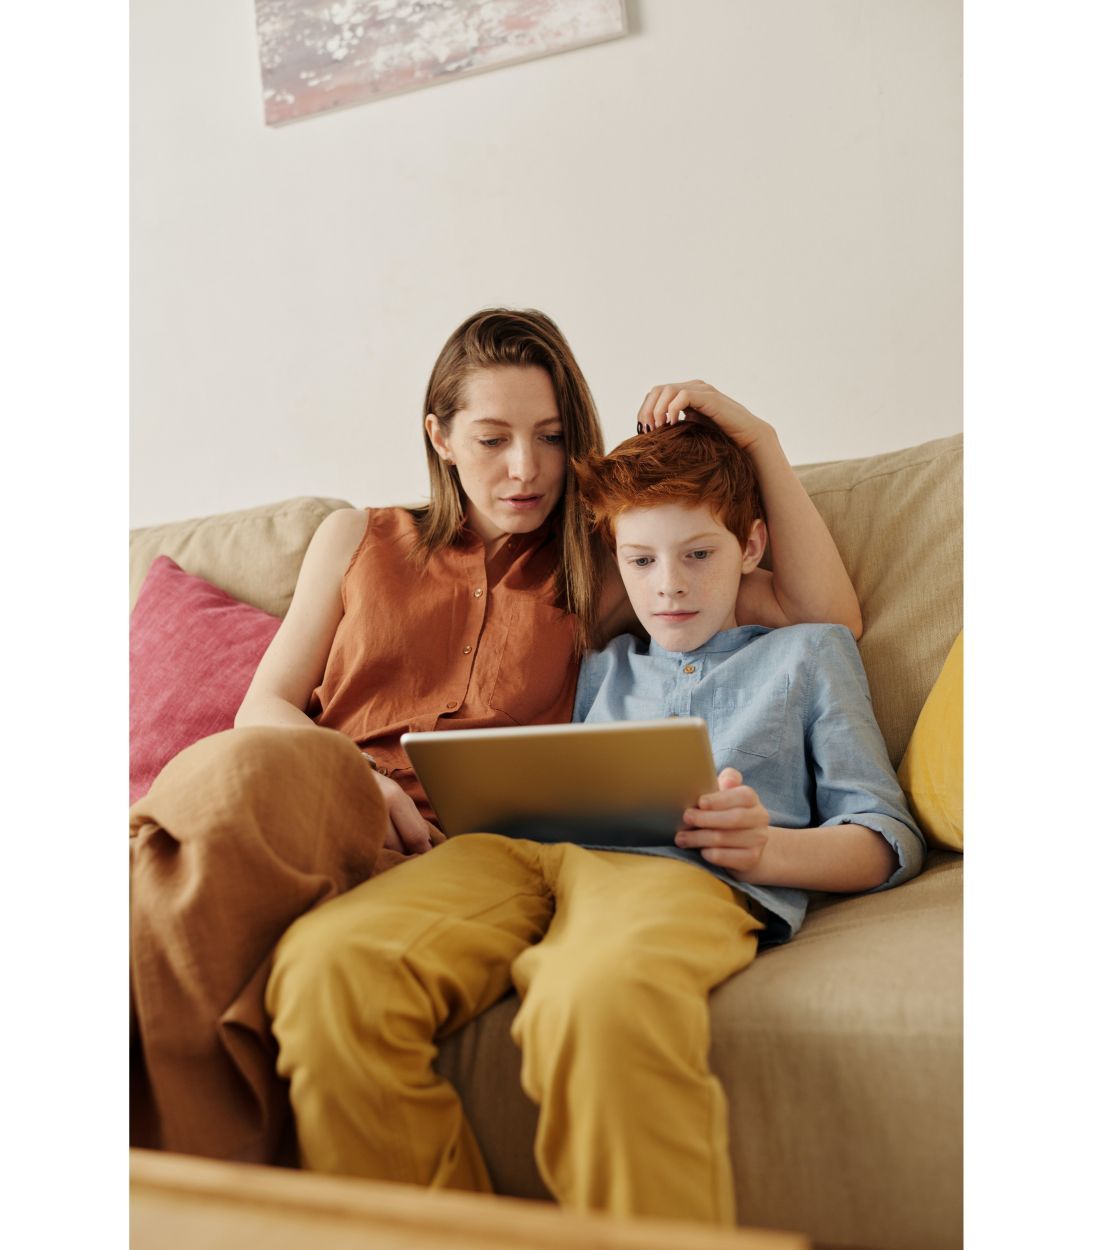 A mom and her son sitting on the couch looking at the tablet